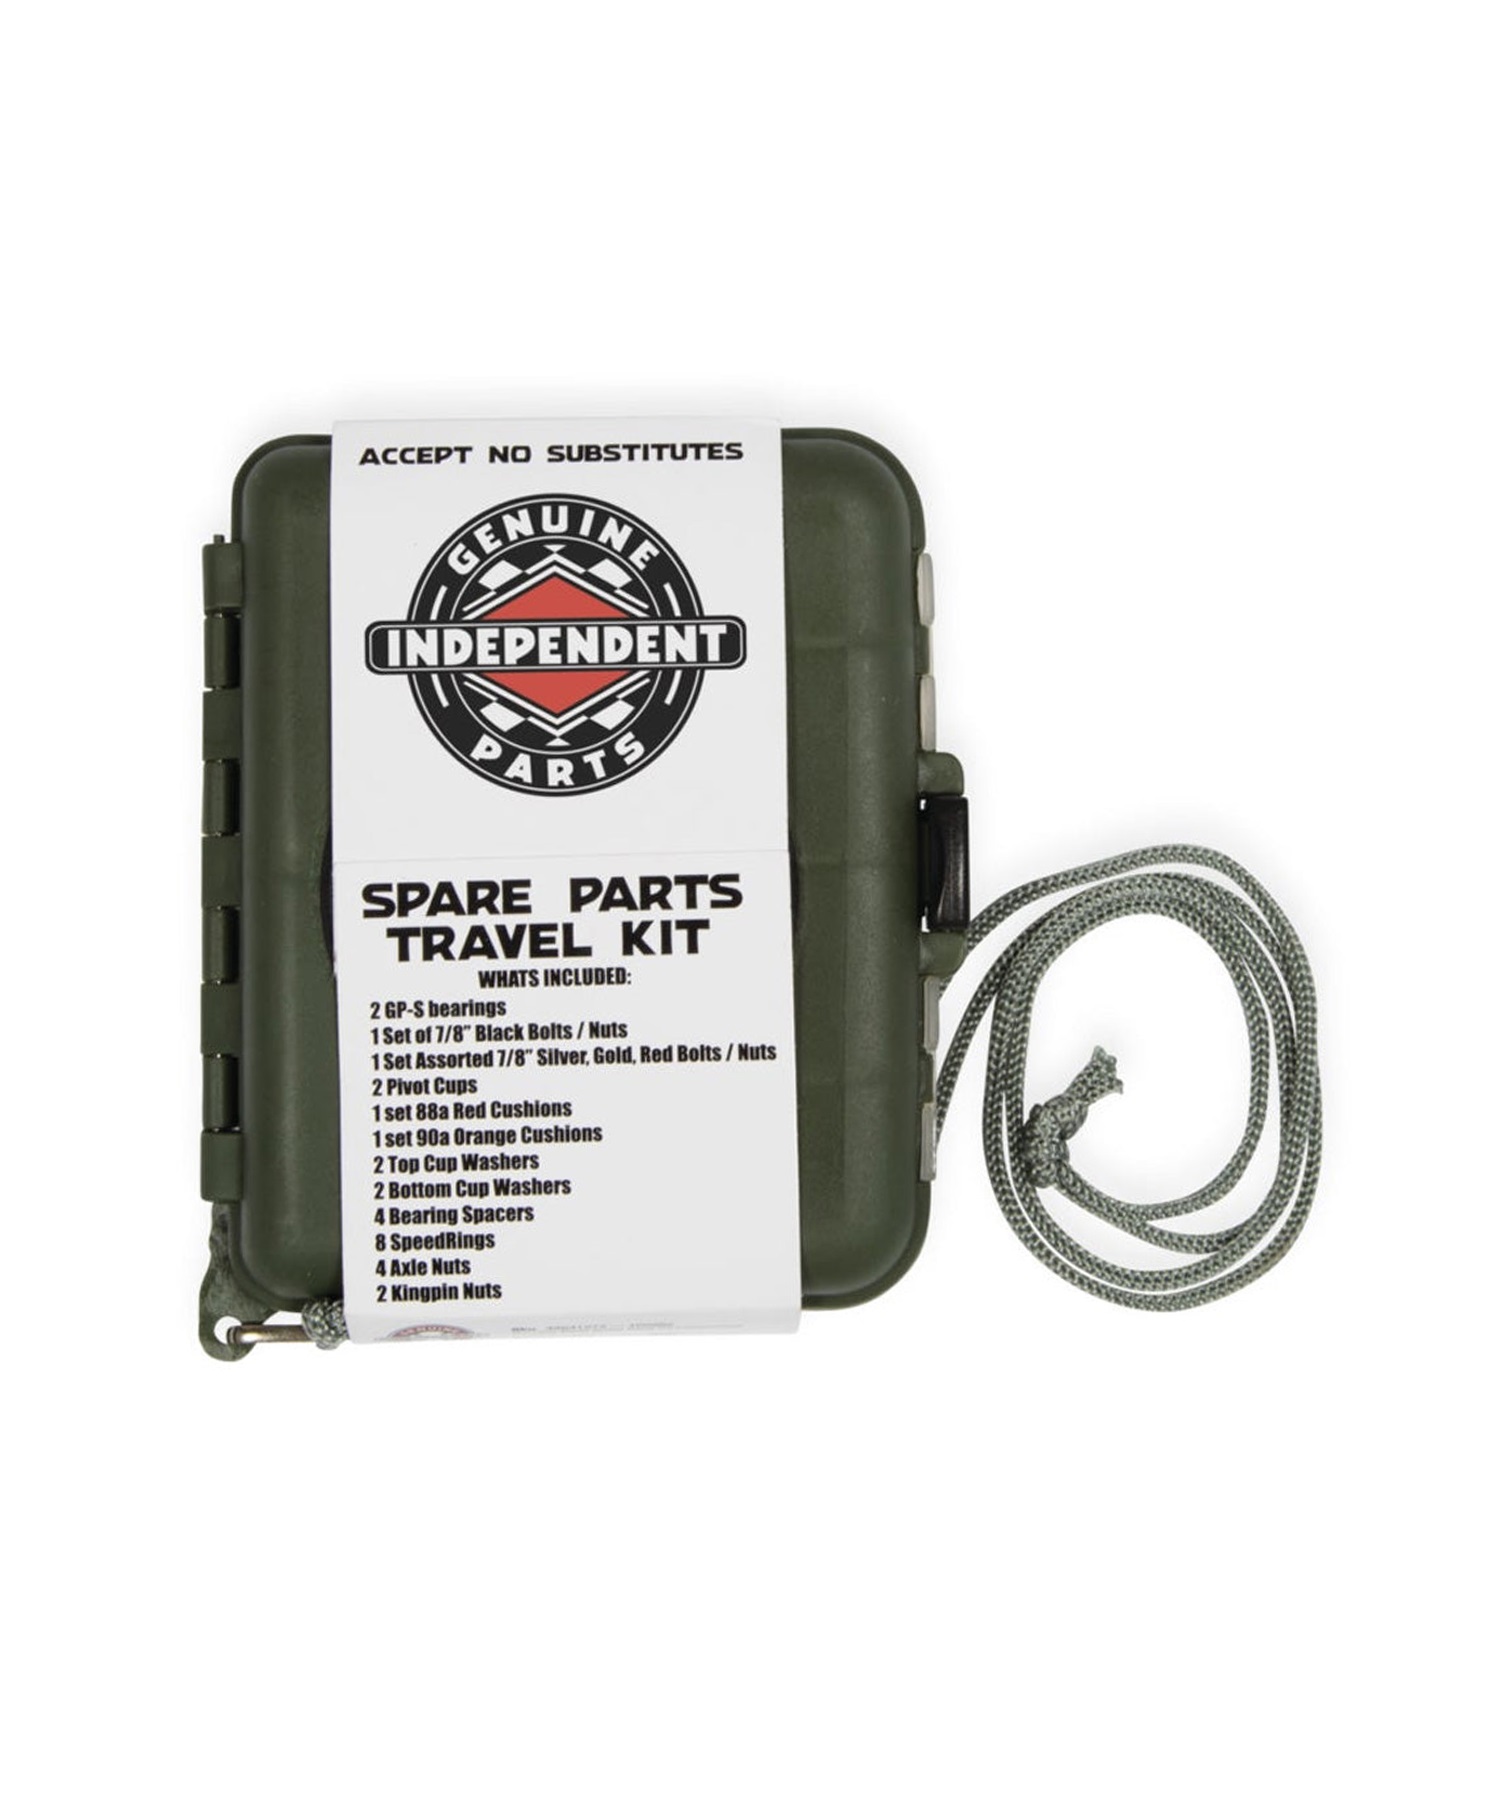 INDEPENDENT インディペンデント スケートボード パーツ SPARE PARTS KIT(ONECOLOR-ONESIZE)